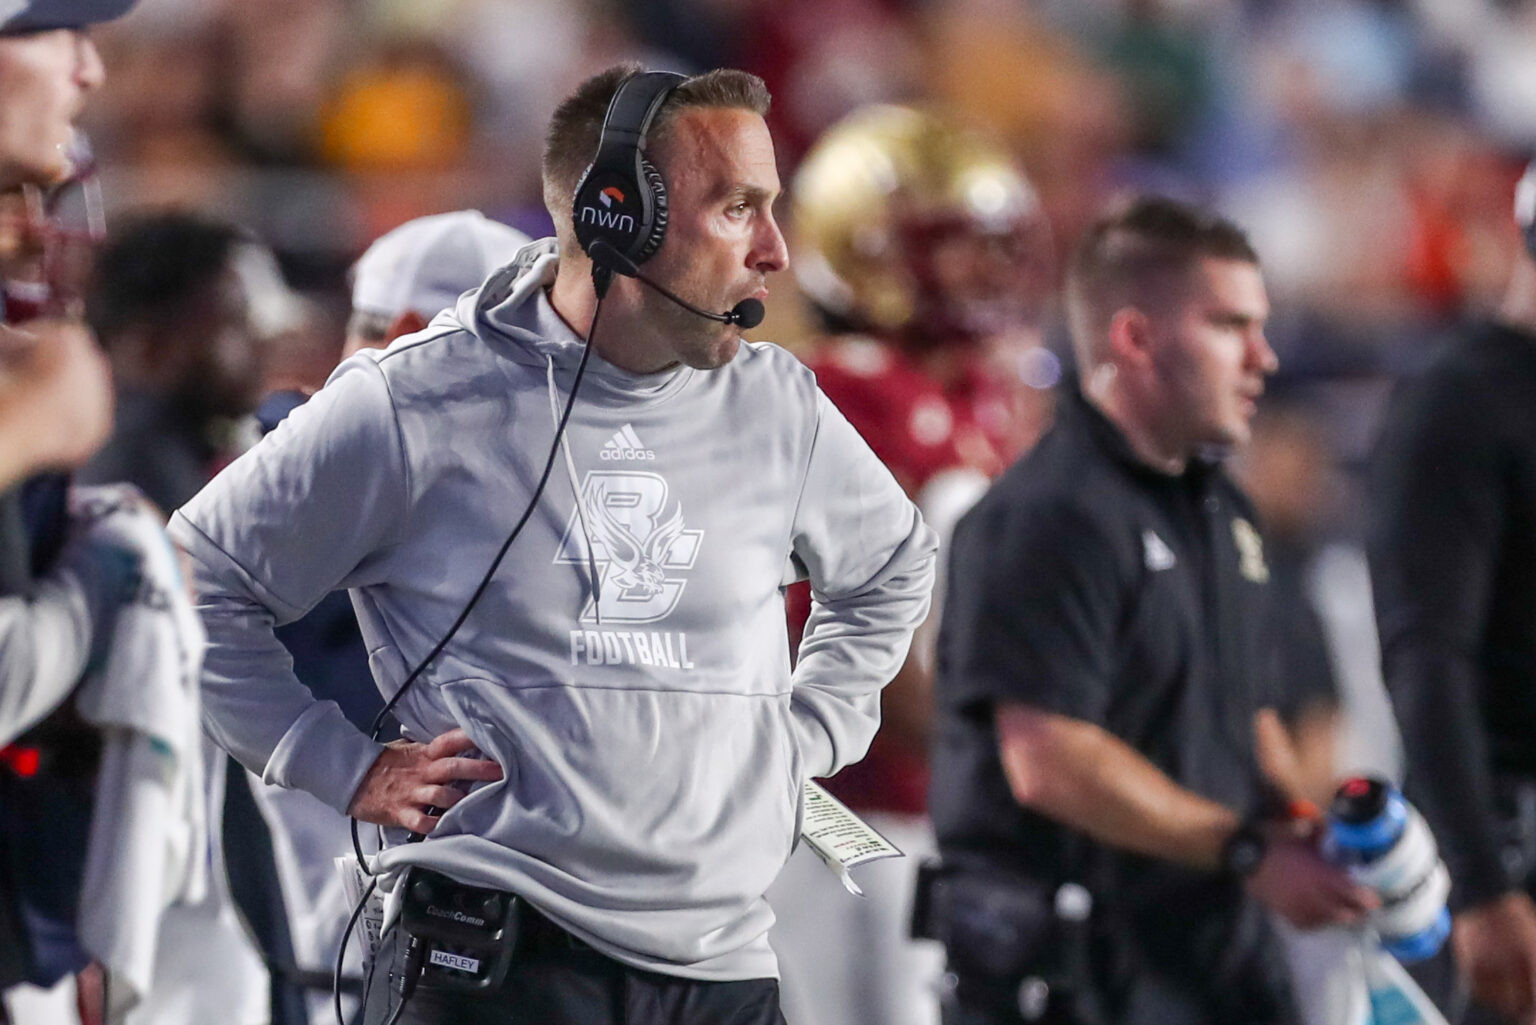 Oct 16, 2021; Chestnut Hill, Massachusetts, USA; Boston College Eagles head coach Jeff Hafley reacts during the first half against the North Carolina State Wolfpack at Alumni Stadium. Mandatory Credit: Paul Rutherford-USA TODAY Sports